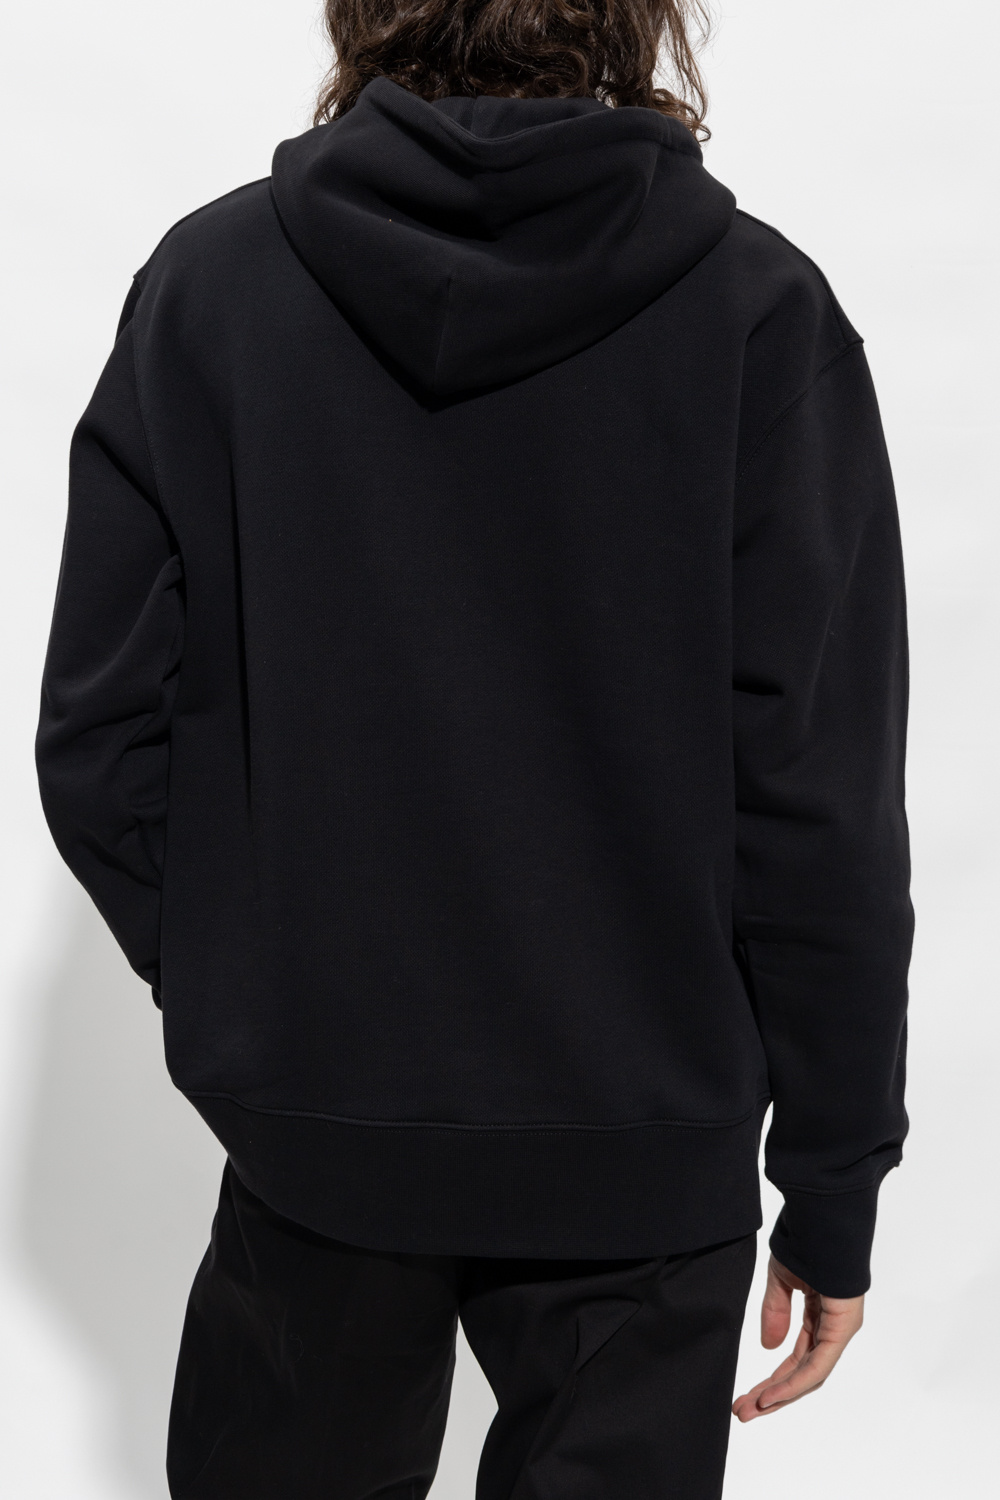 Norse Projects ‘Arne’ Fall hoodie